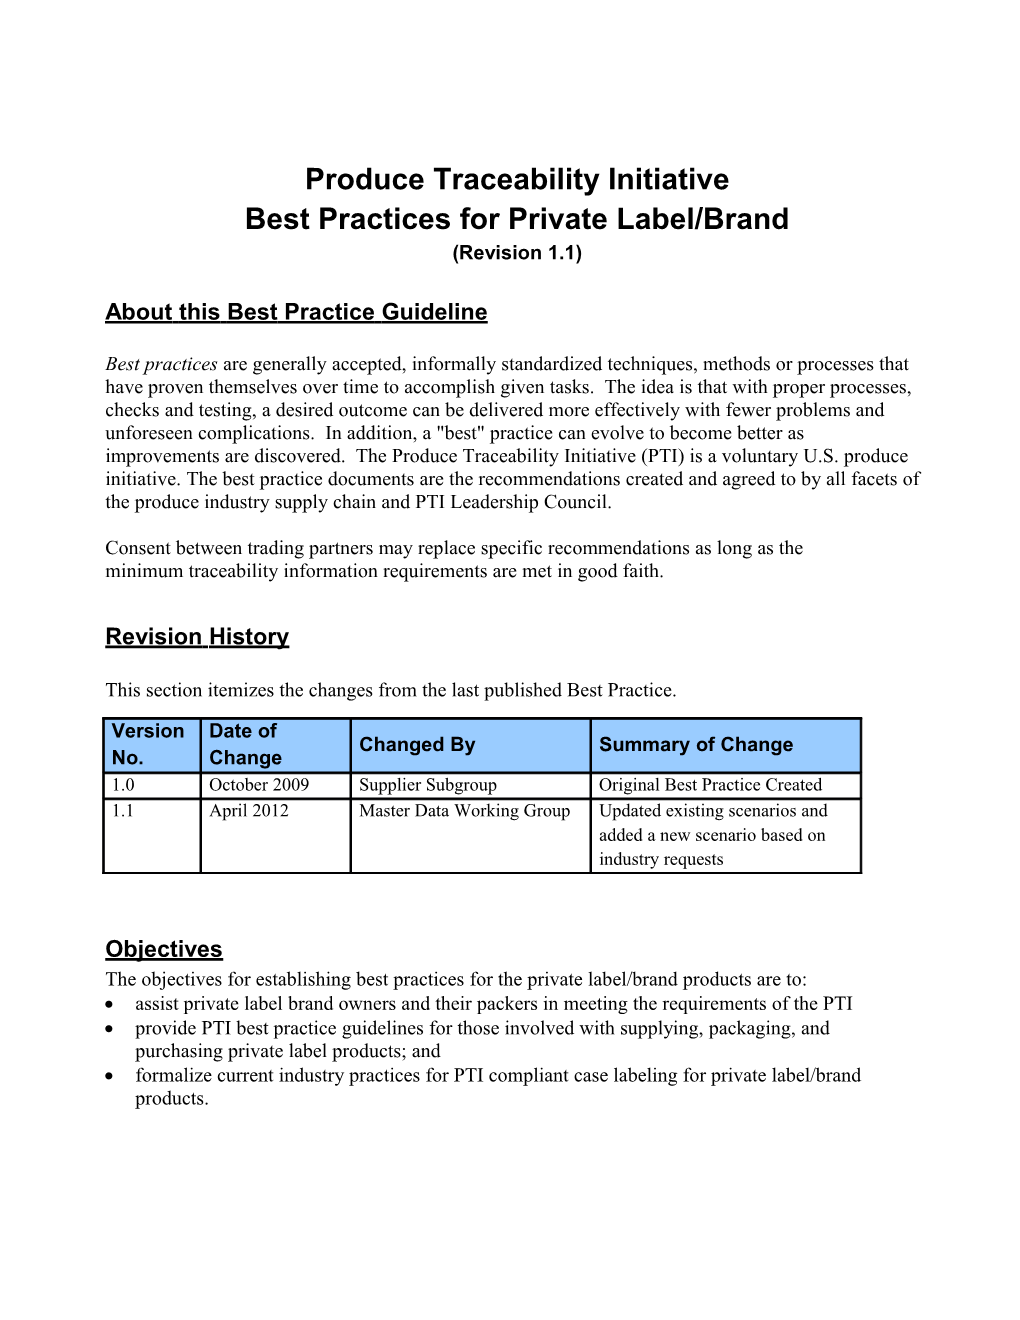 FINAL DRAFT PTI Best Practices for Private Label April 2012